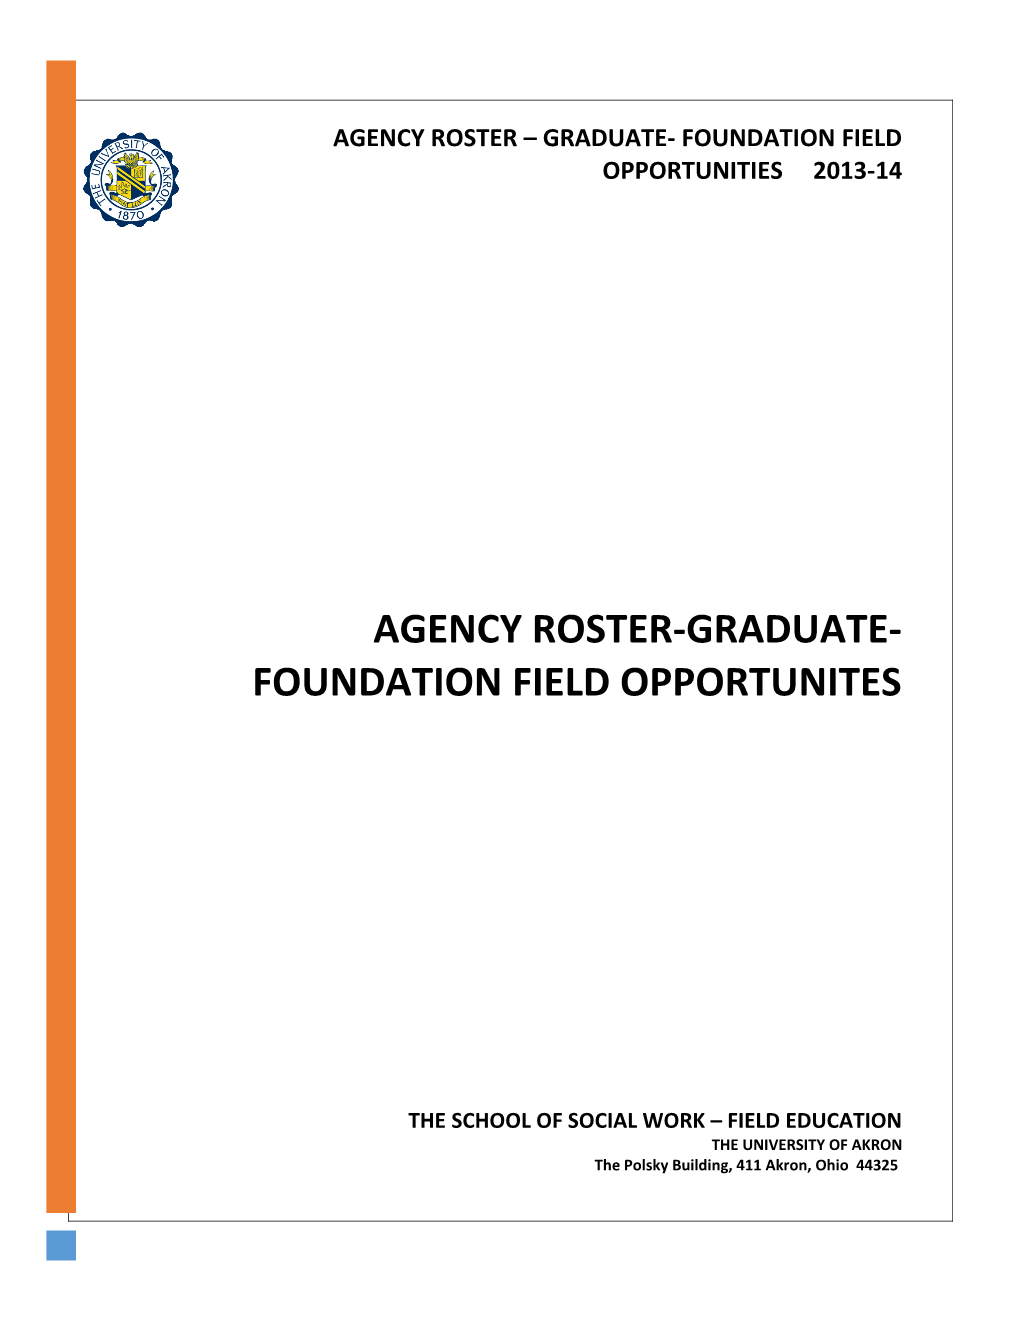 Agency Roster-Graduate- Foundation Field Opportunites